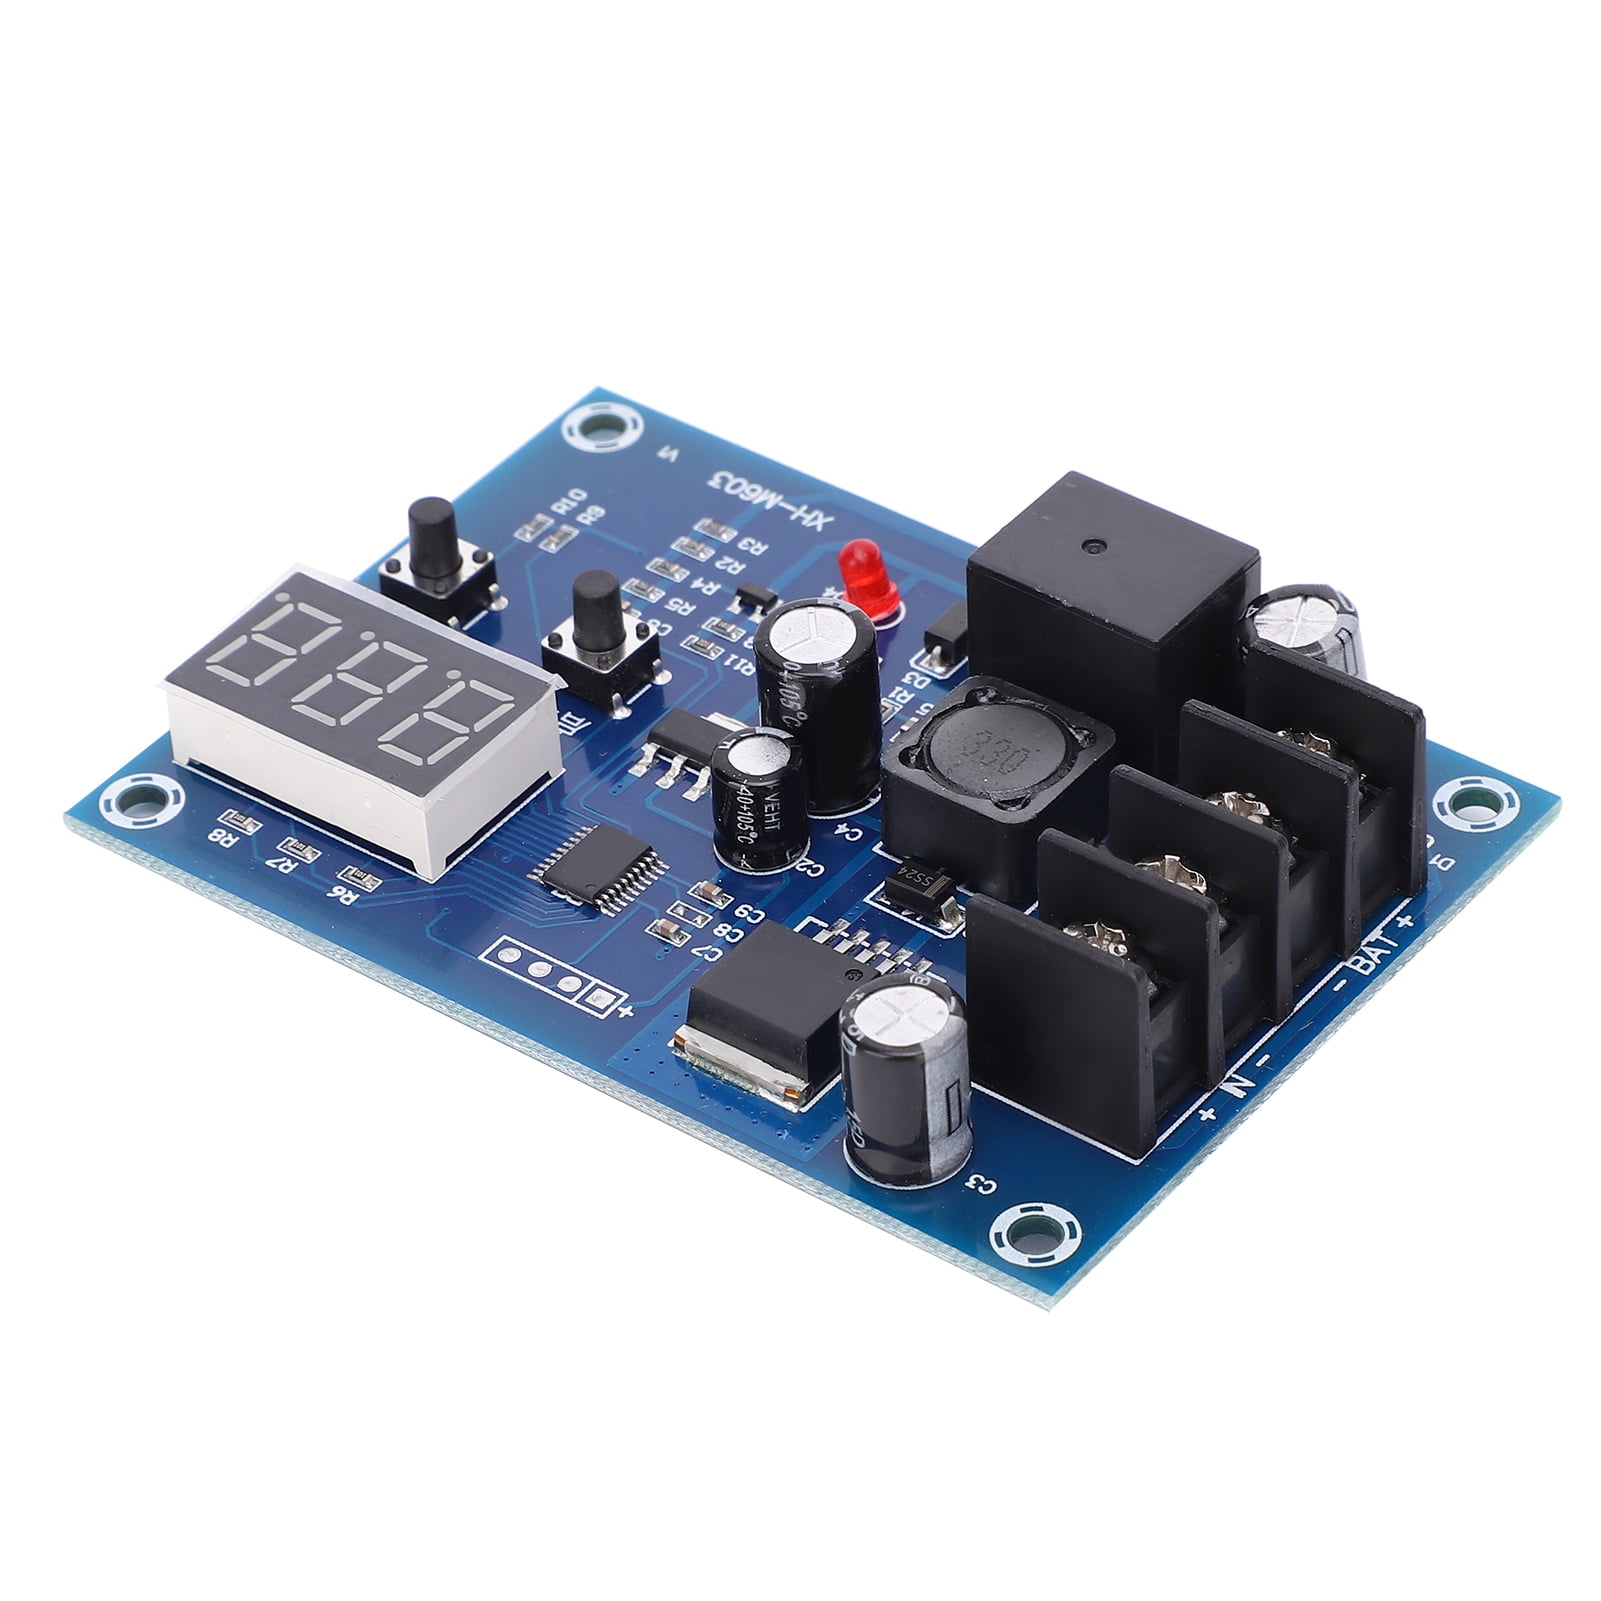 XH-M603 HW-632 Charge Control Module 12-24V Storage Lithium Battery Control Smart Switch Protection Board with LED Display 